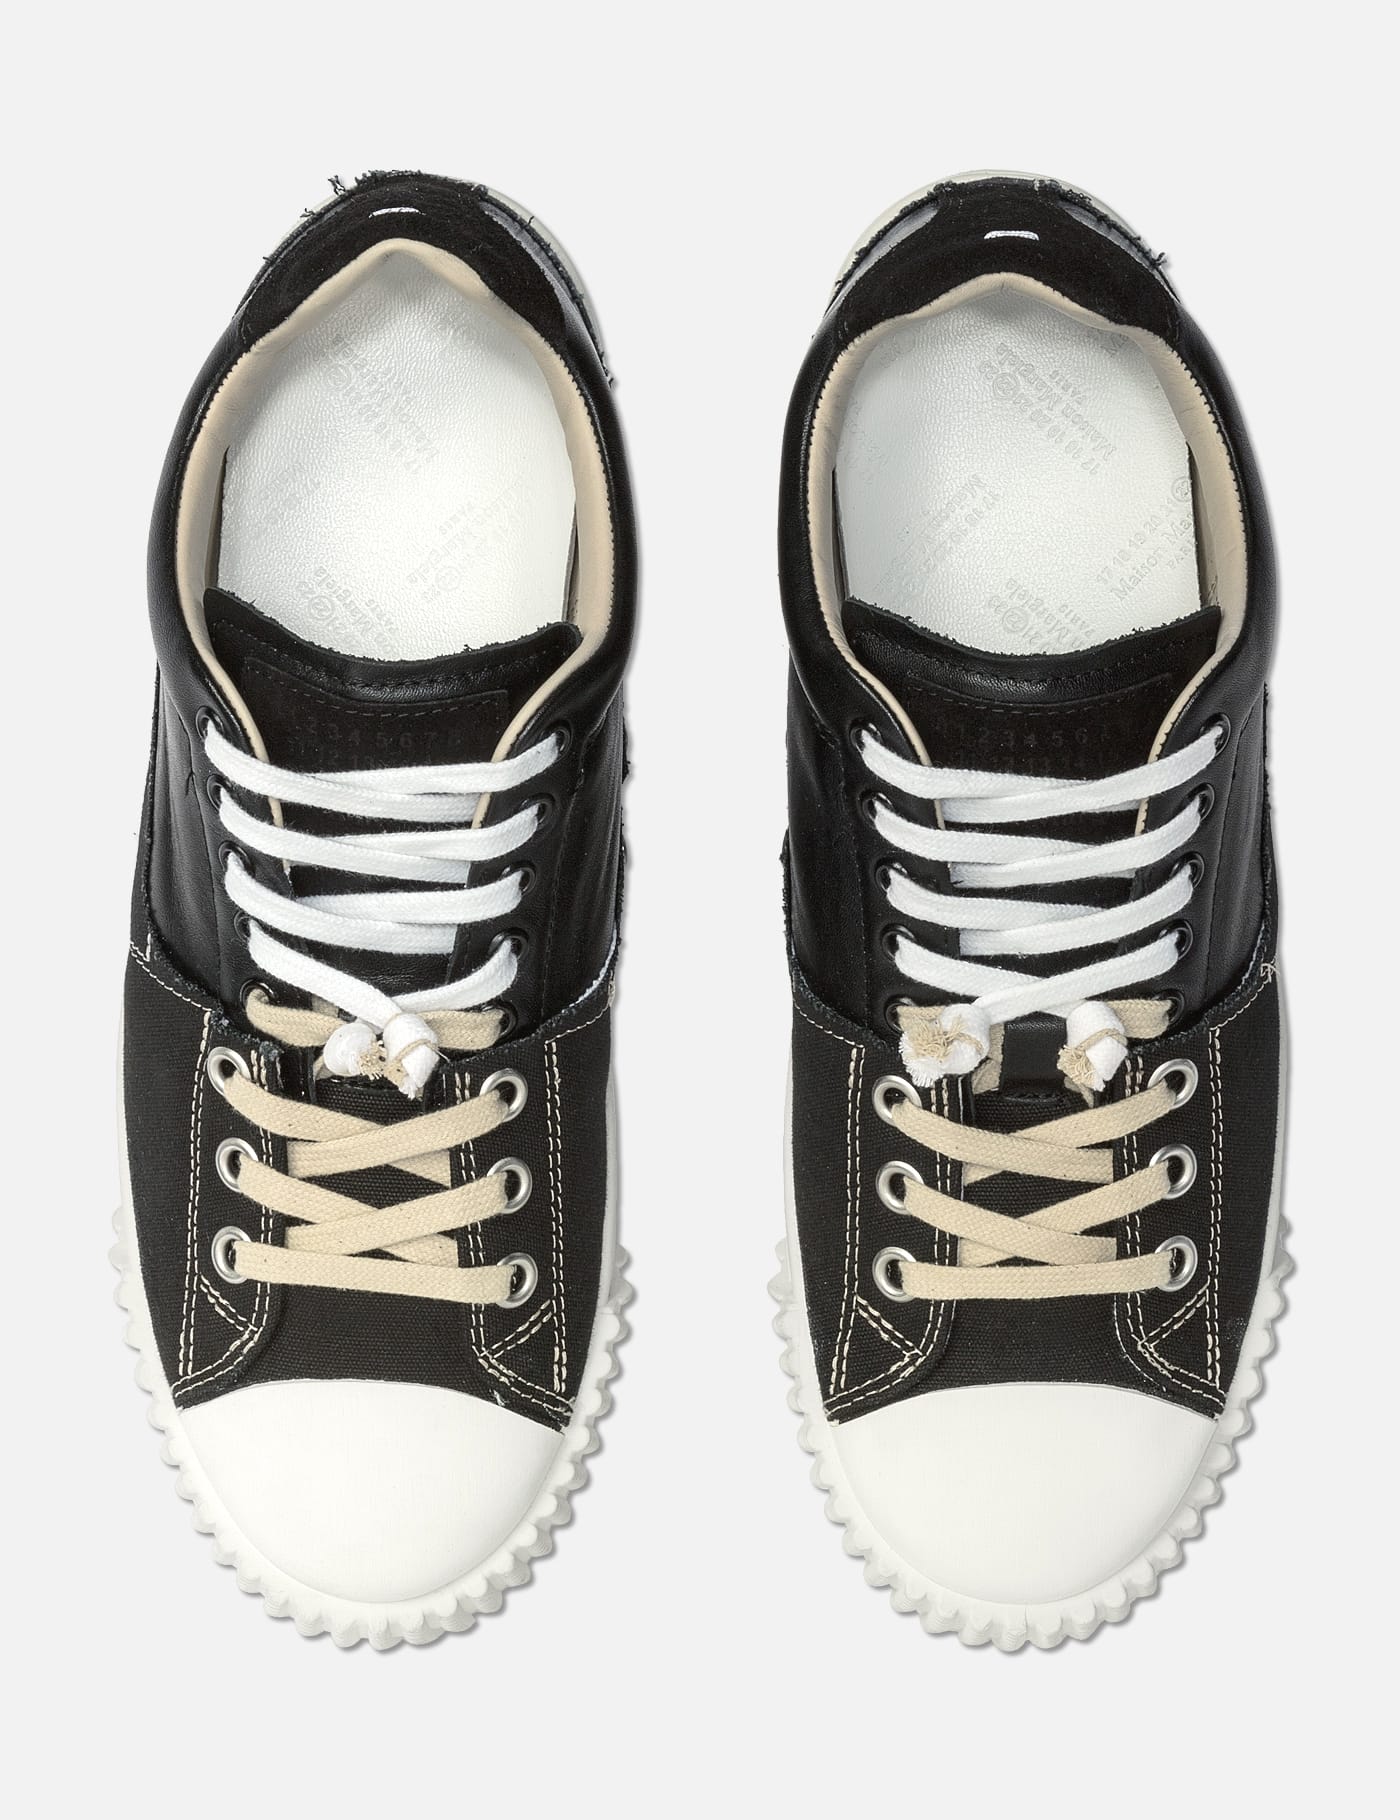 Maison Margiela - New Evolution Sneakers | HBX - Globally Curated